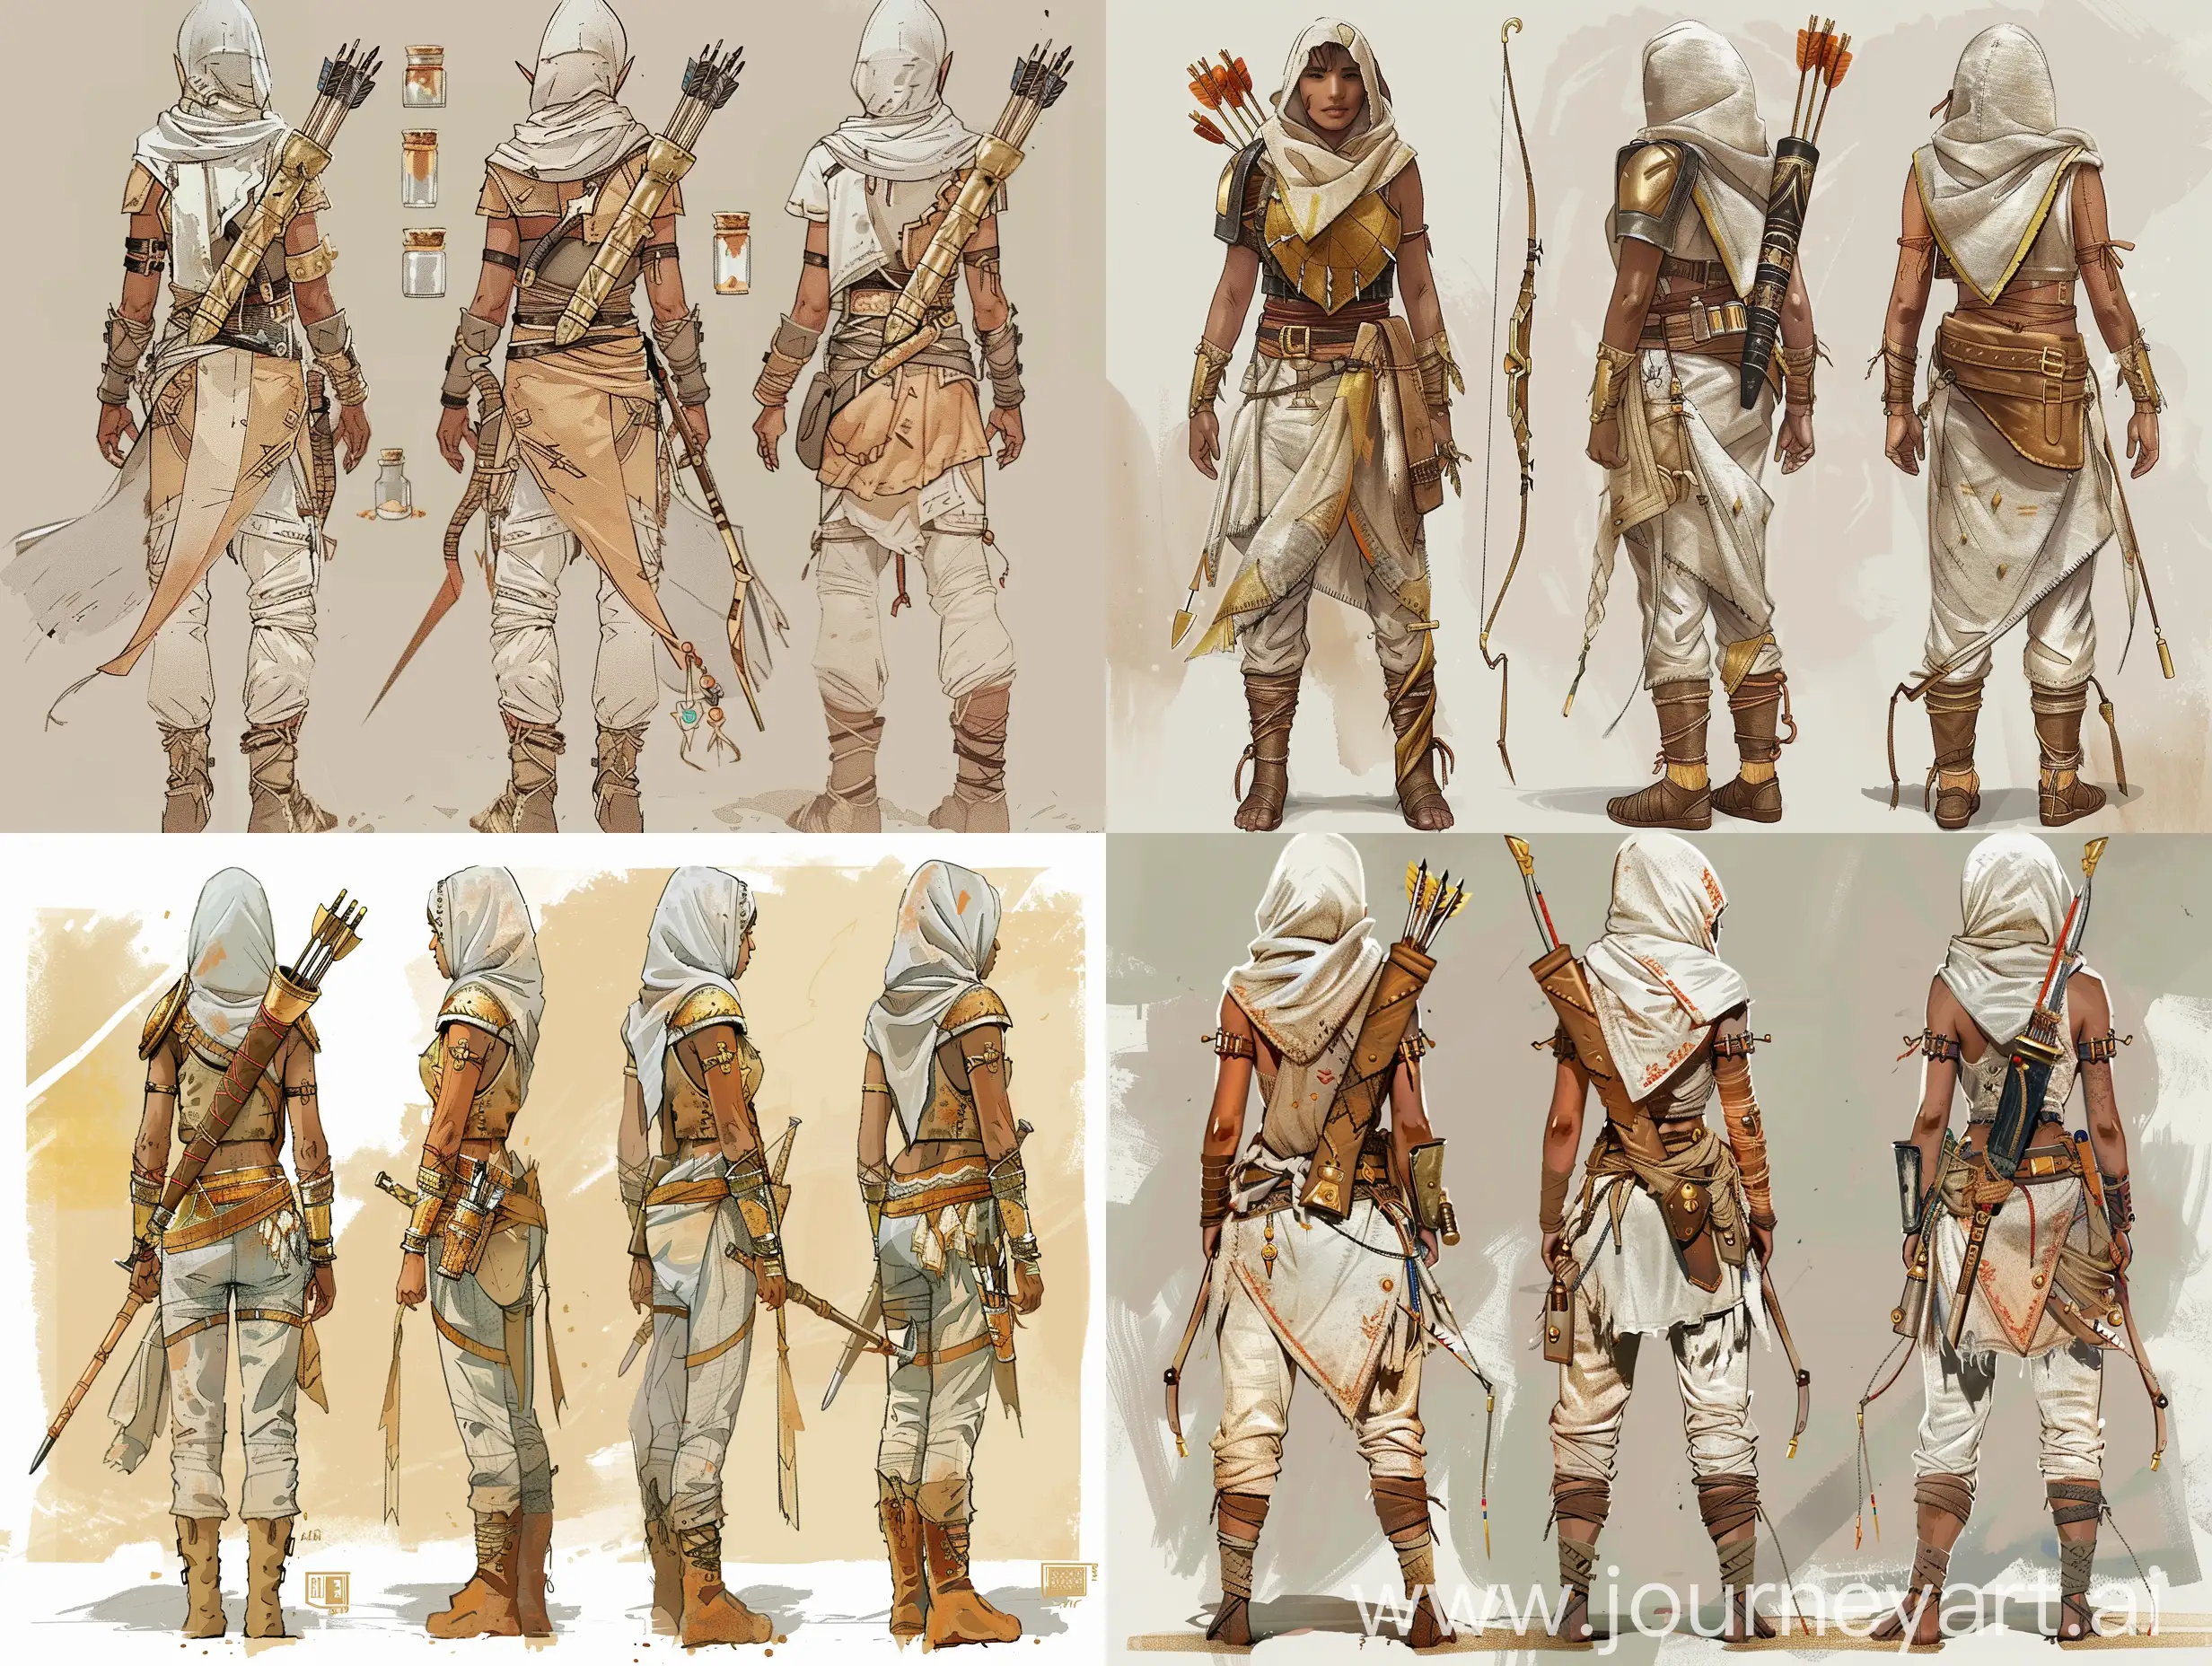 A detailed character design sheet, featuring the back and full body of a North African girl whose attire reflects practicality and desert tradition. She wears lightweight leather armor adorned with brass fittings, loose-fitting linen pants tucked into high boots, and a headscarf shielding her face from the sun and sand. A bandolier holds extra arrows and vials of sandstorm powder. The style is reminiscent of classic fantasy art, with a character concept emphasizing chaos.